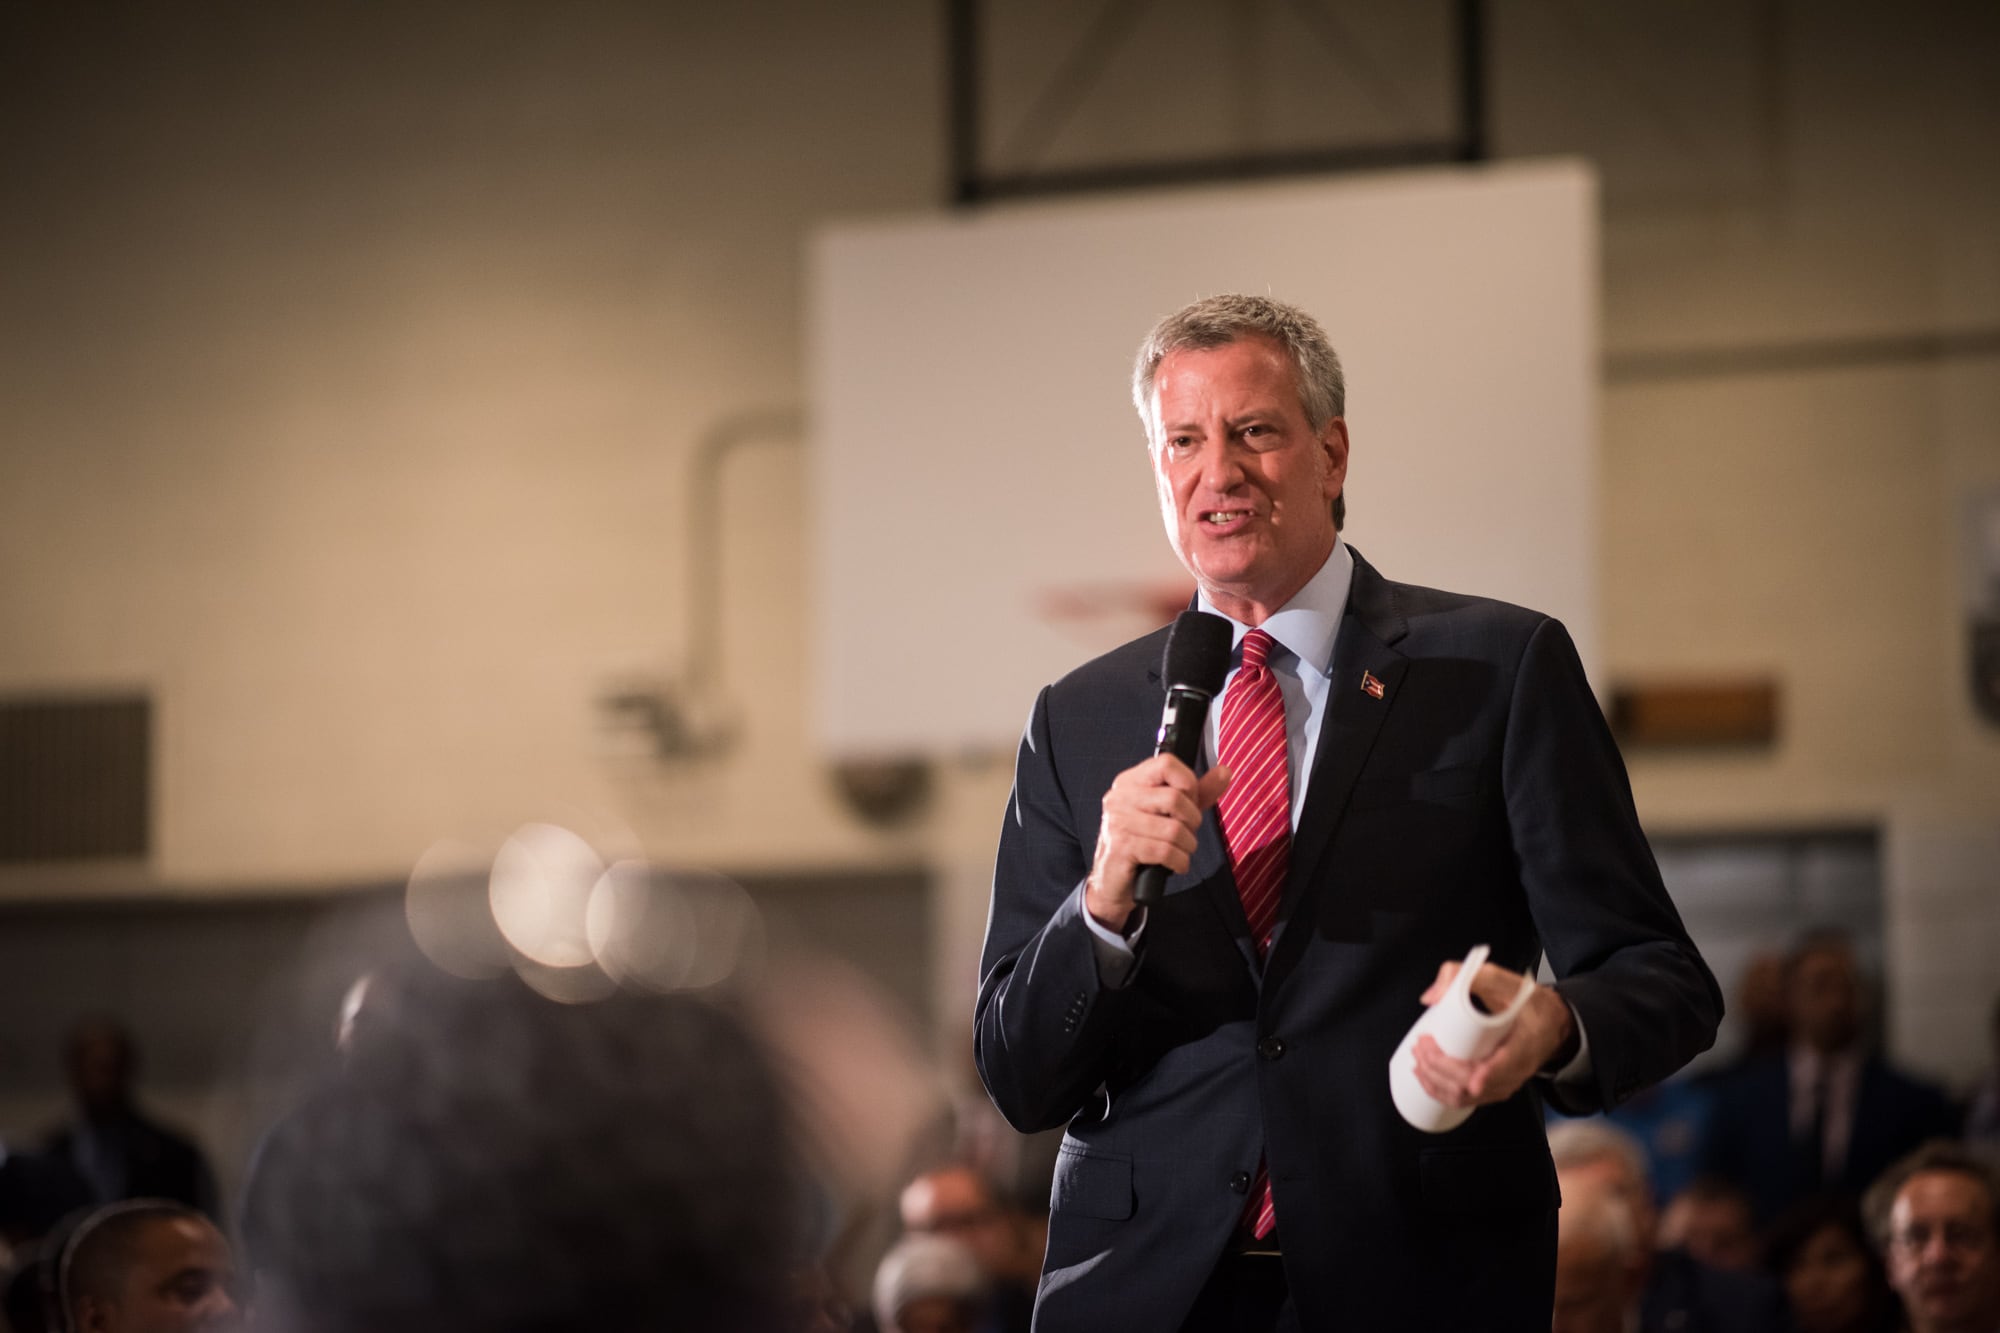 Mayor Bill de Blasio announced a phased-in approach to starting the school year, with the youngest students and those with disabilities attending in-person classes first. 